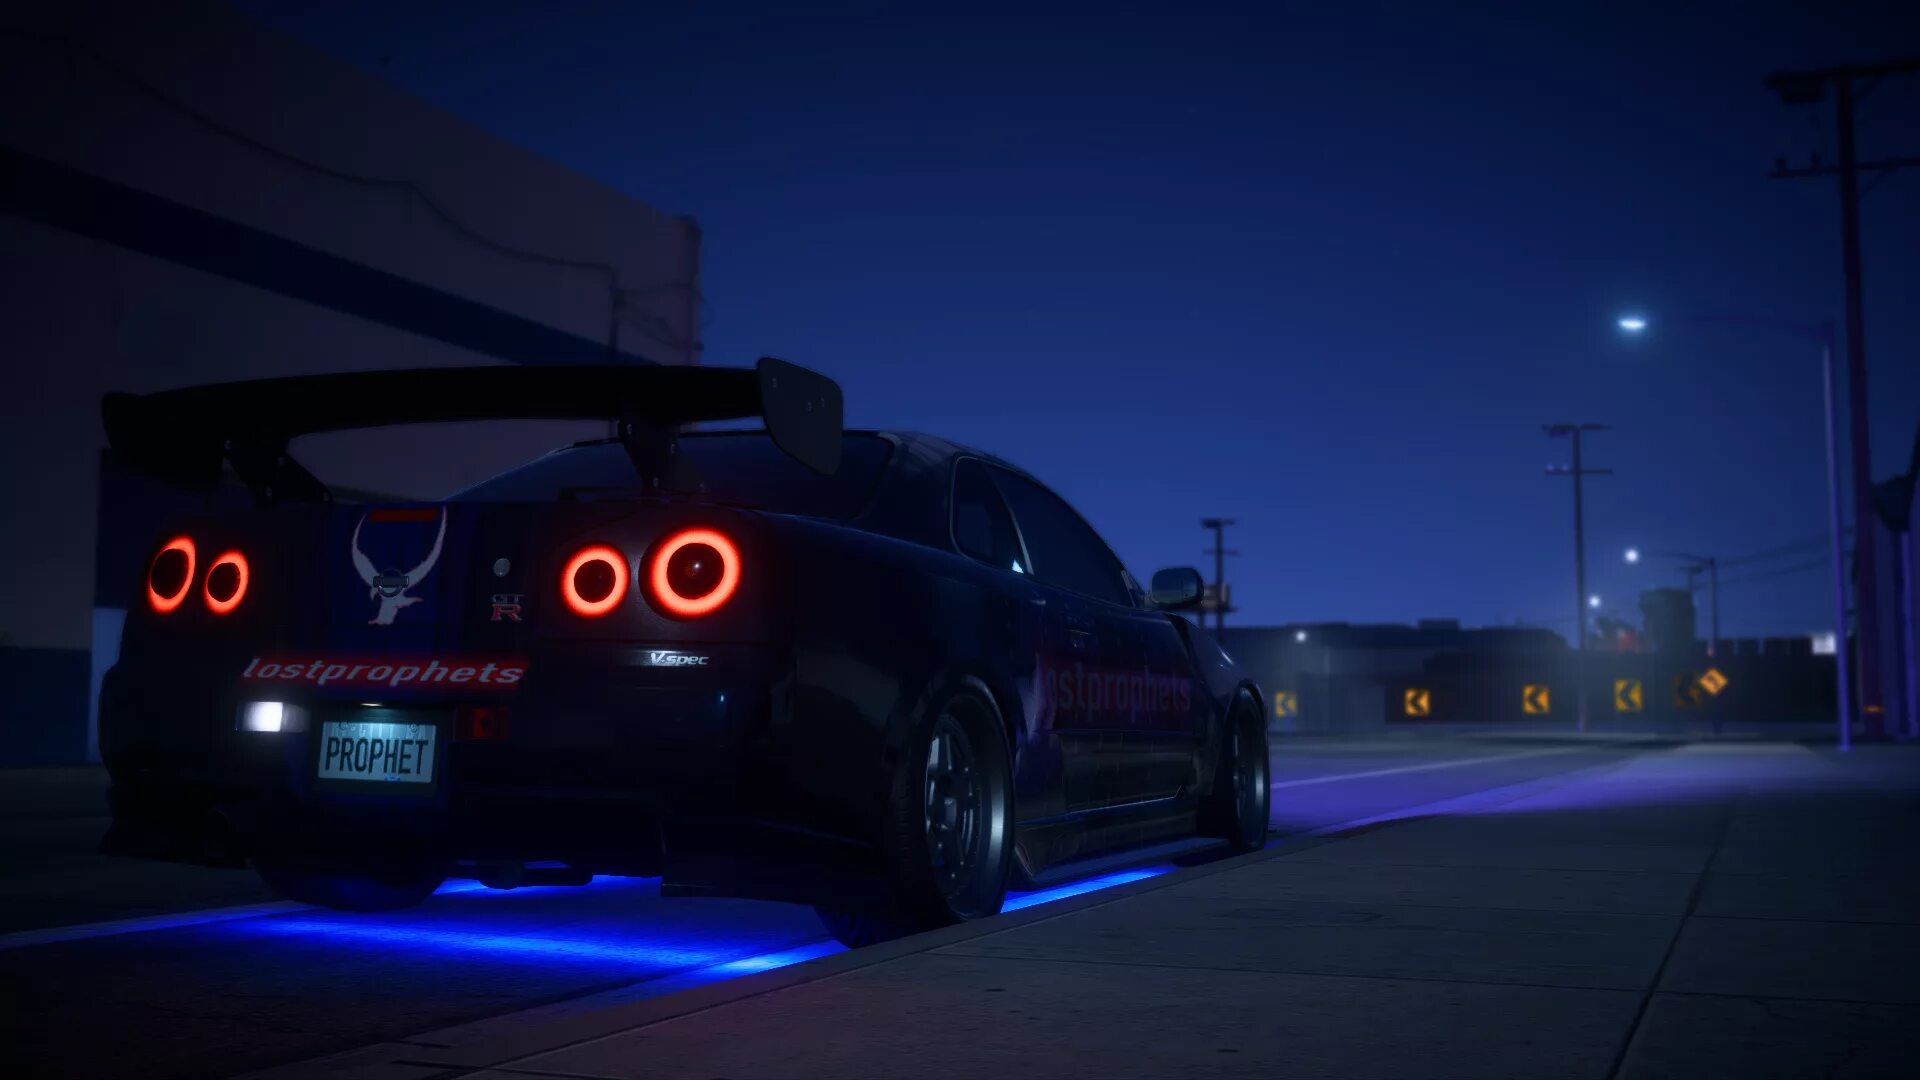 Nfs payback ps4. Need for Speed Payback (ps4). NFS 2015 ps4 Tuning GTR. Need for Speed неон.